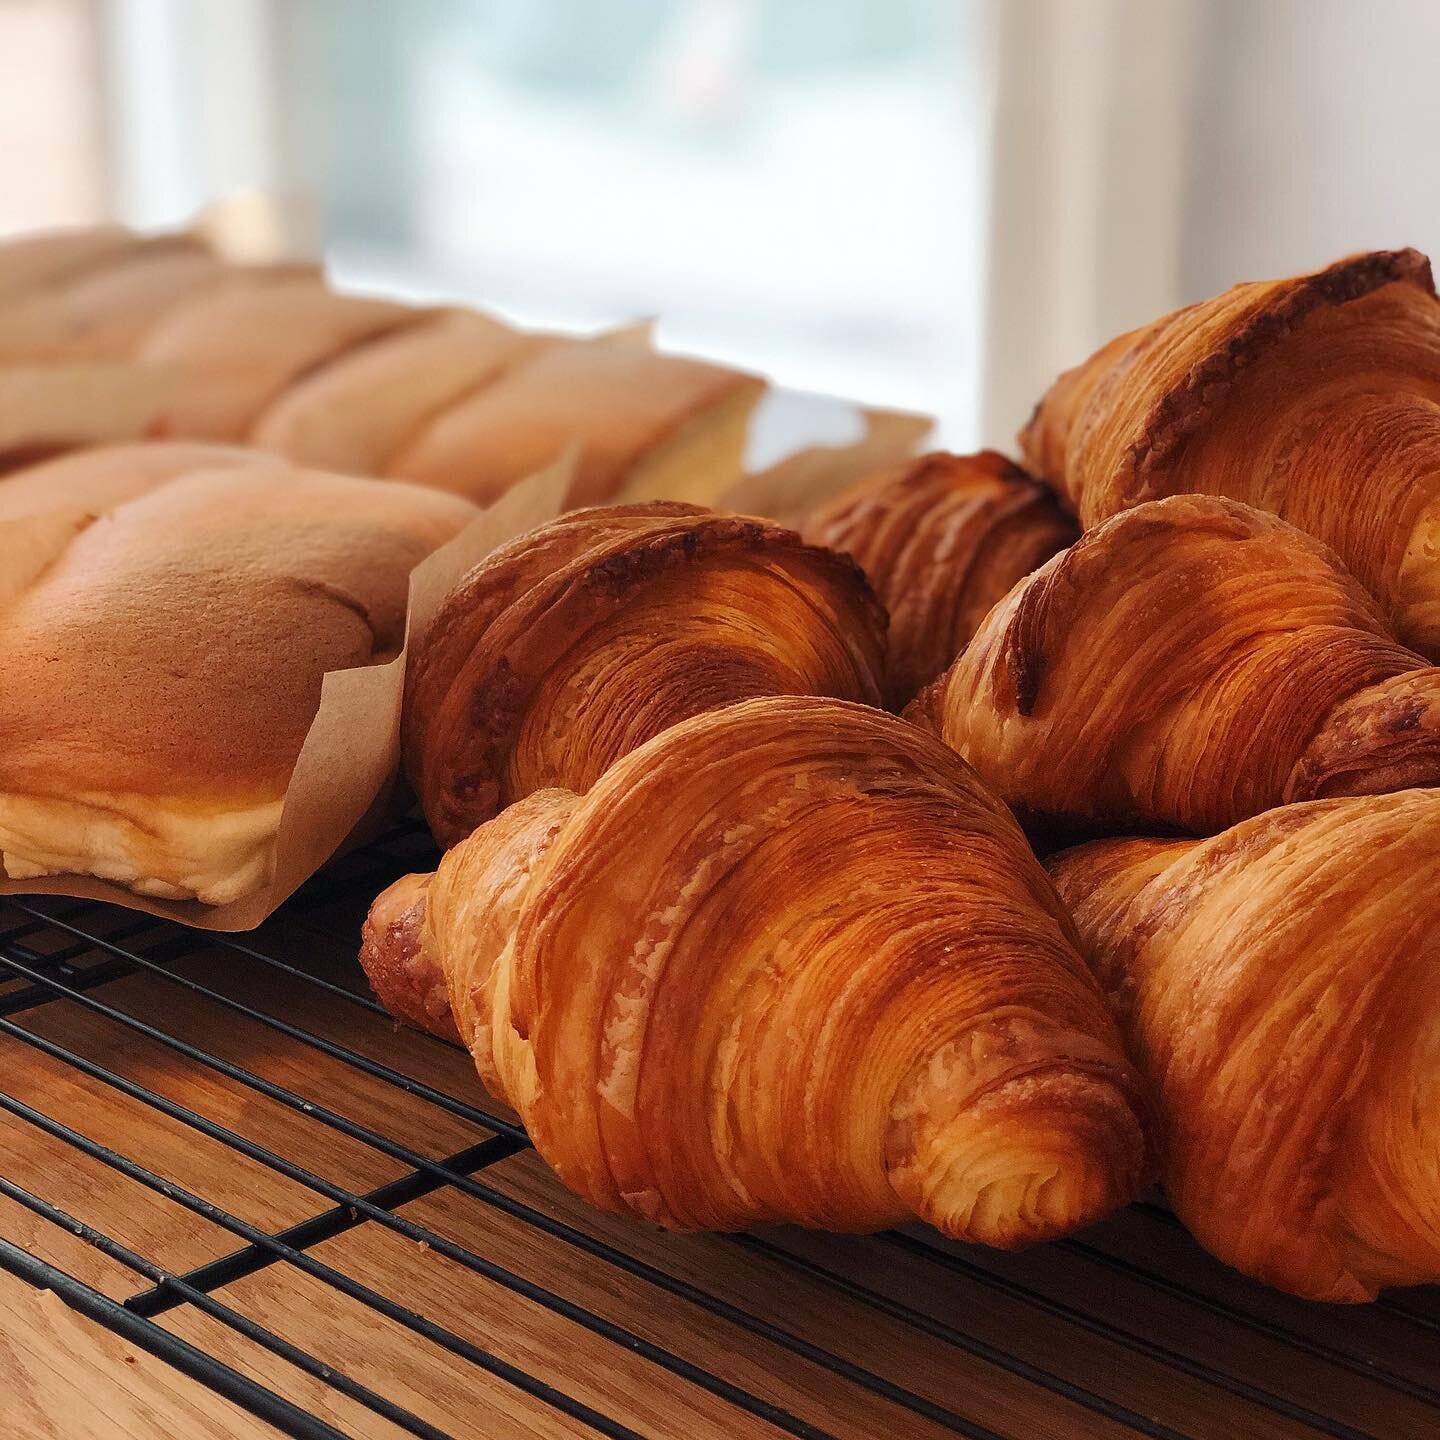 Throwback to that week when we had croissant!!

I love making bread. I used to bake sourdough on my days off. If I was to retire, I think I would just bake bread in a small little tiny shop. Just me myself and I working. That&rsquo;s my dream.

I mad